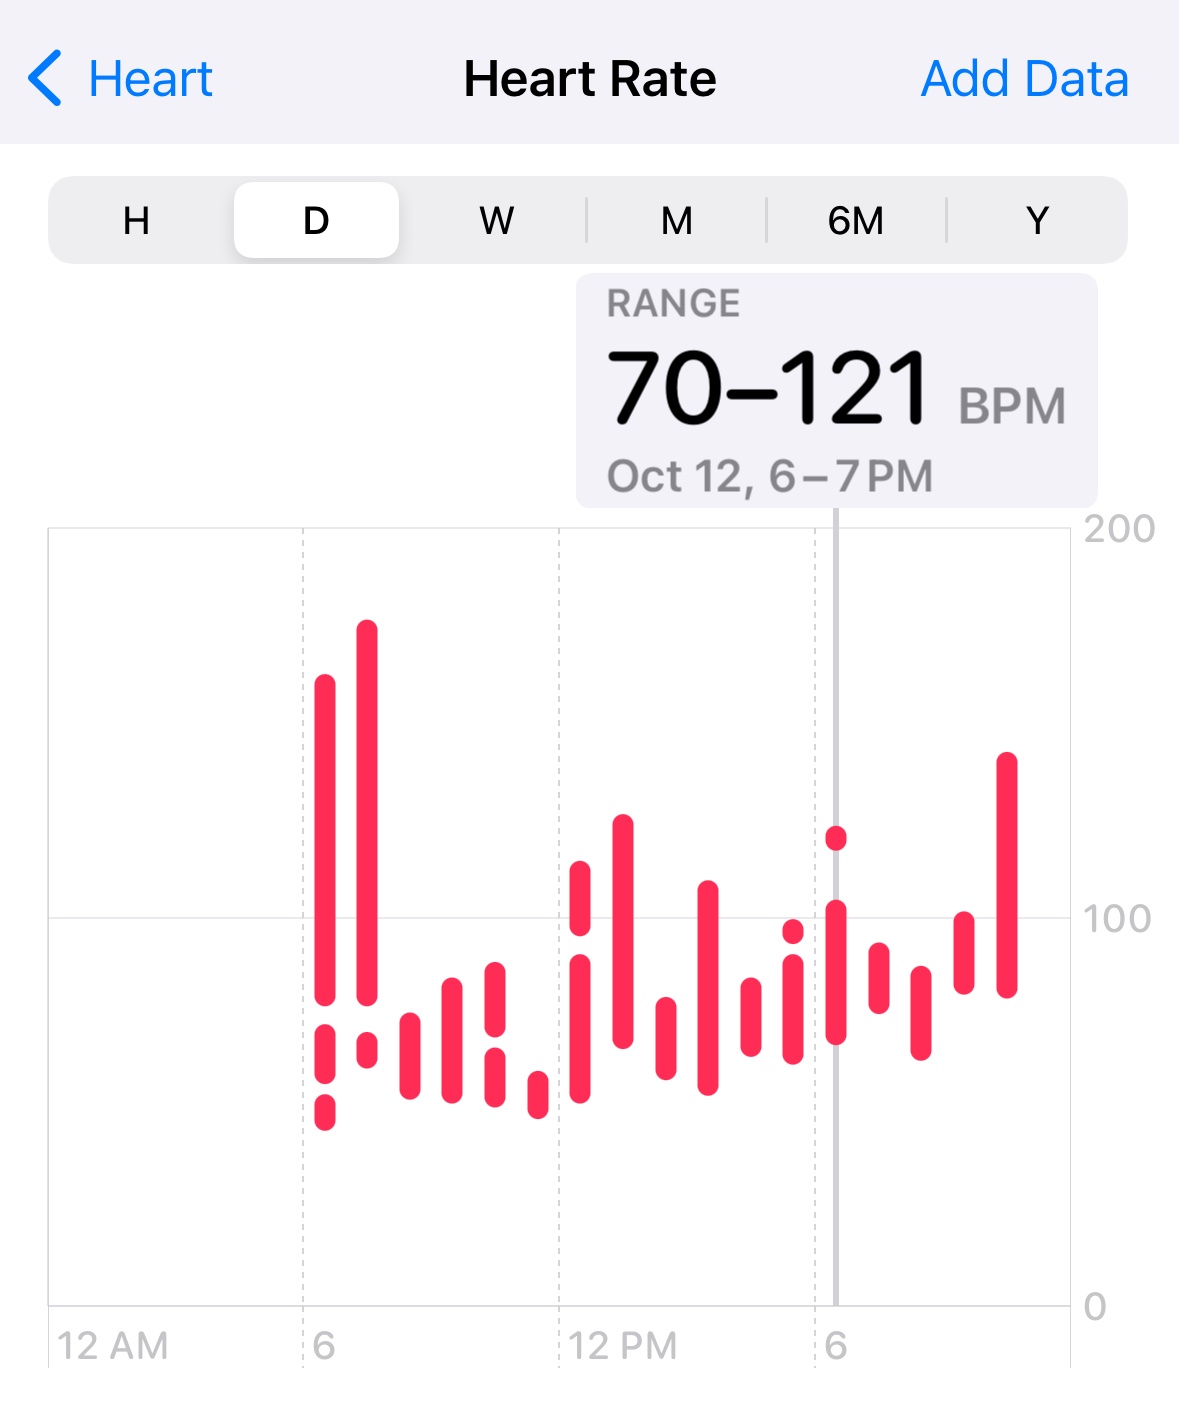 A graph of my heart rate from my iPhone